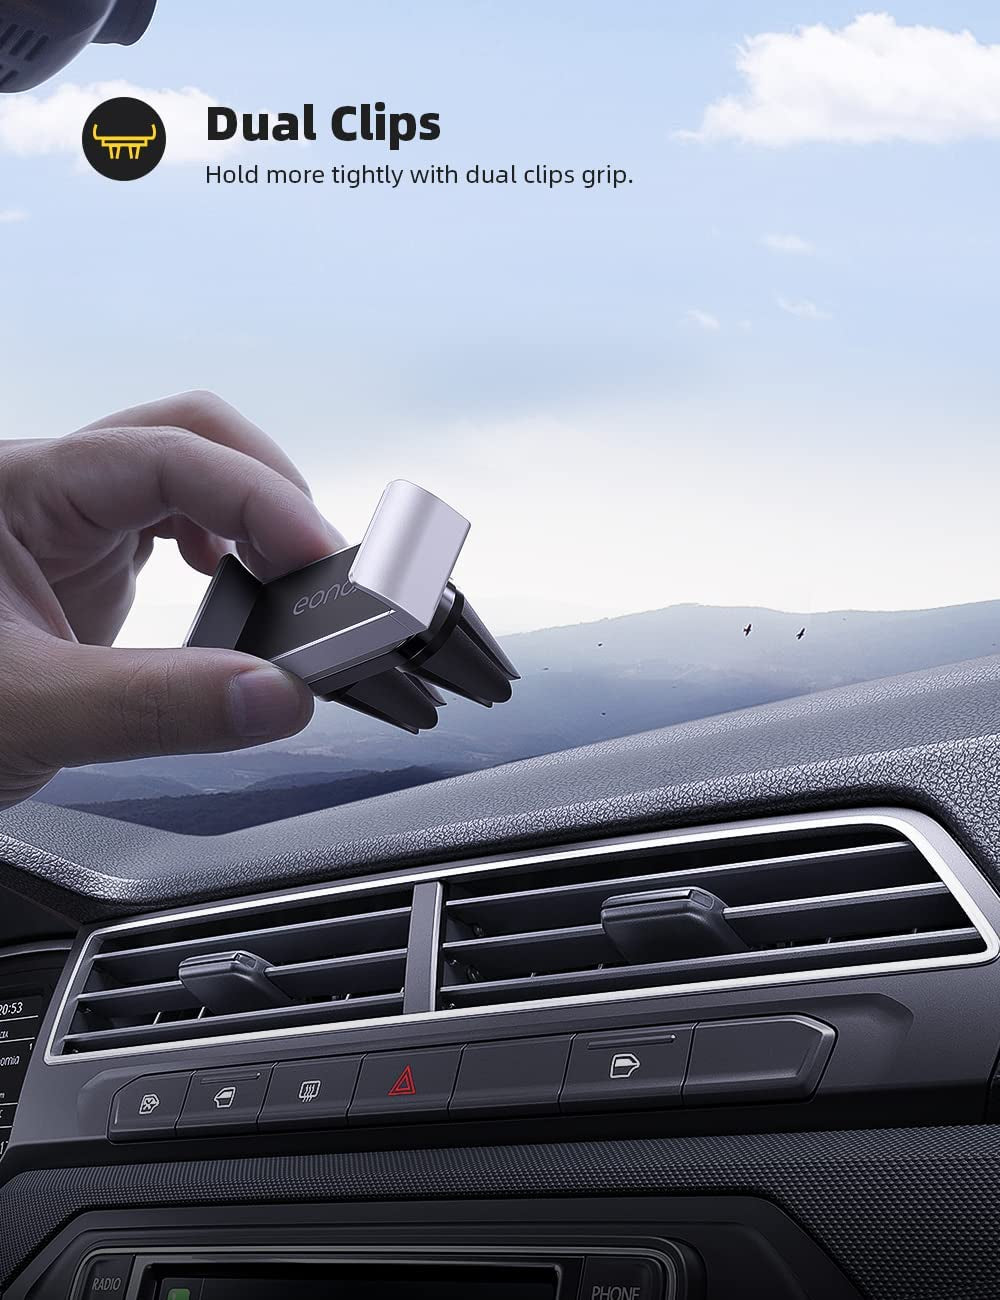 Amazon Brand - Car Phone Holder, Universal Vent Clip Mount 360 Rotating Air Cradle Stand for Iphone 14 Pro Max Plus, 13 12 11 XS XR X 8 7 6S 6, Galaxy S10 S9 S8, 4.7-6.5" Smartphones - Silver - FoxMart™️ - Eono